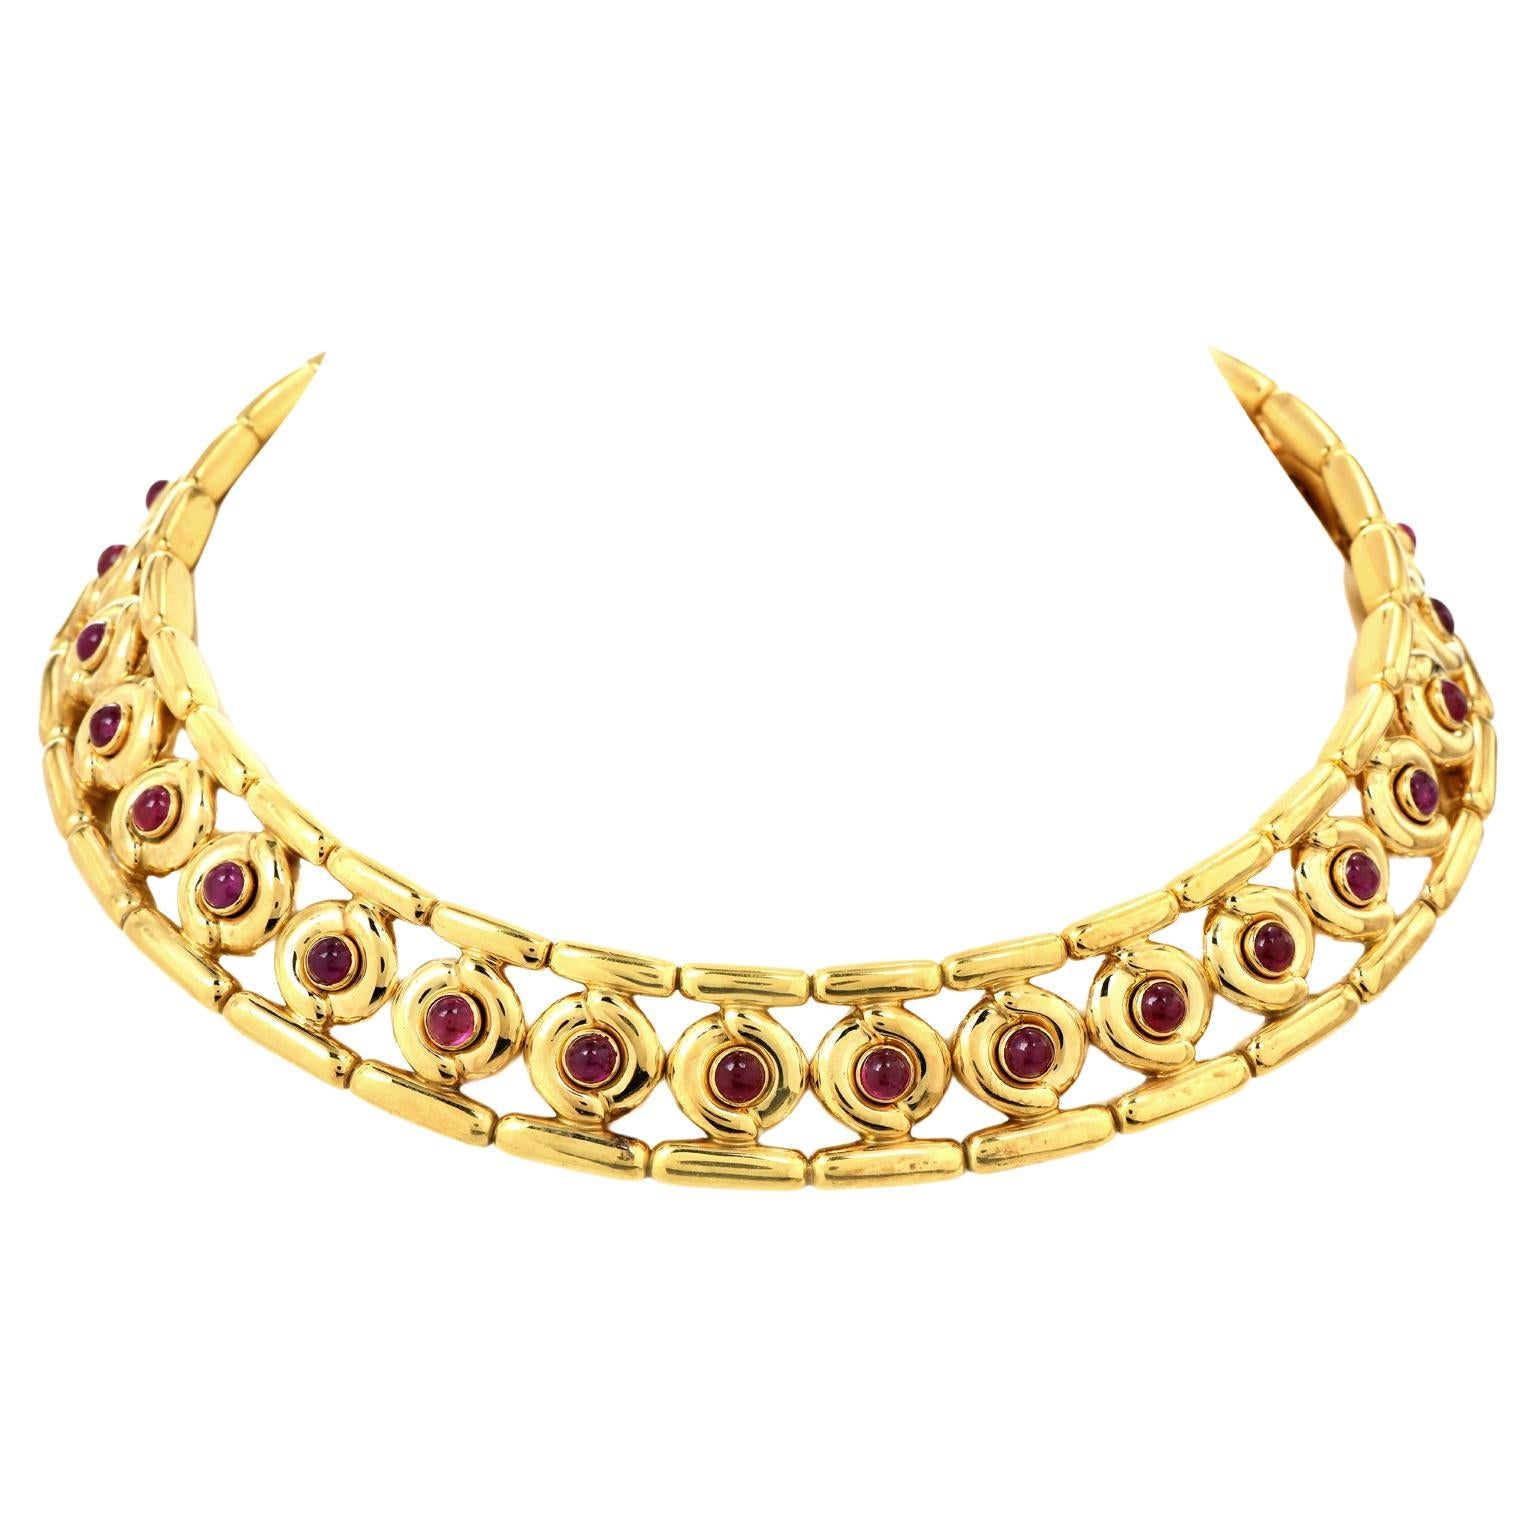 Fraone Milano Vintage Ruby 18k Yellow Gold Collar Choker Cuff Necklace For Sale